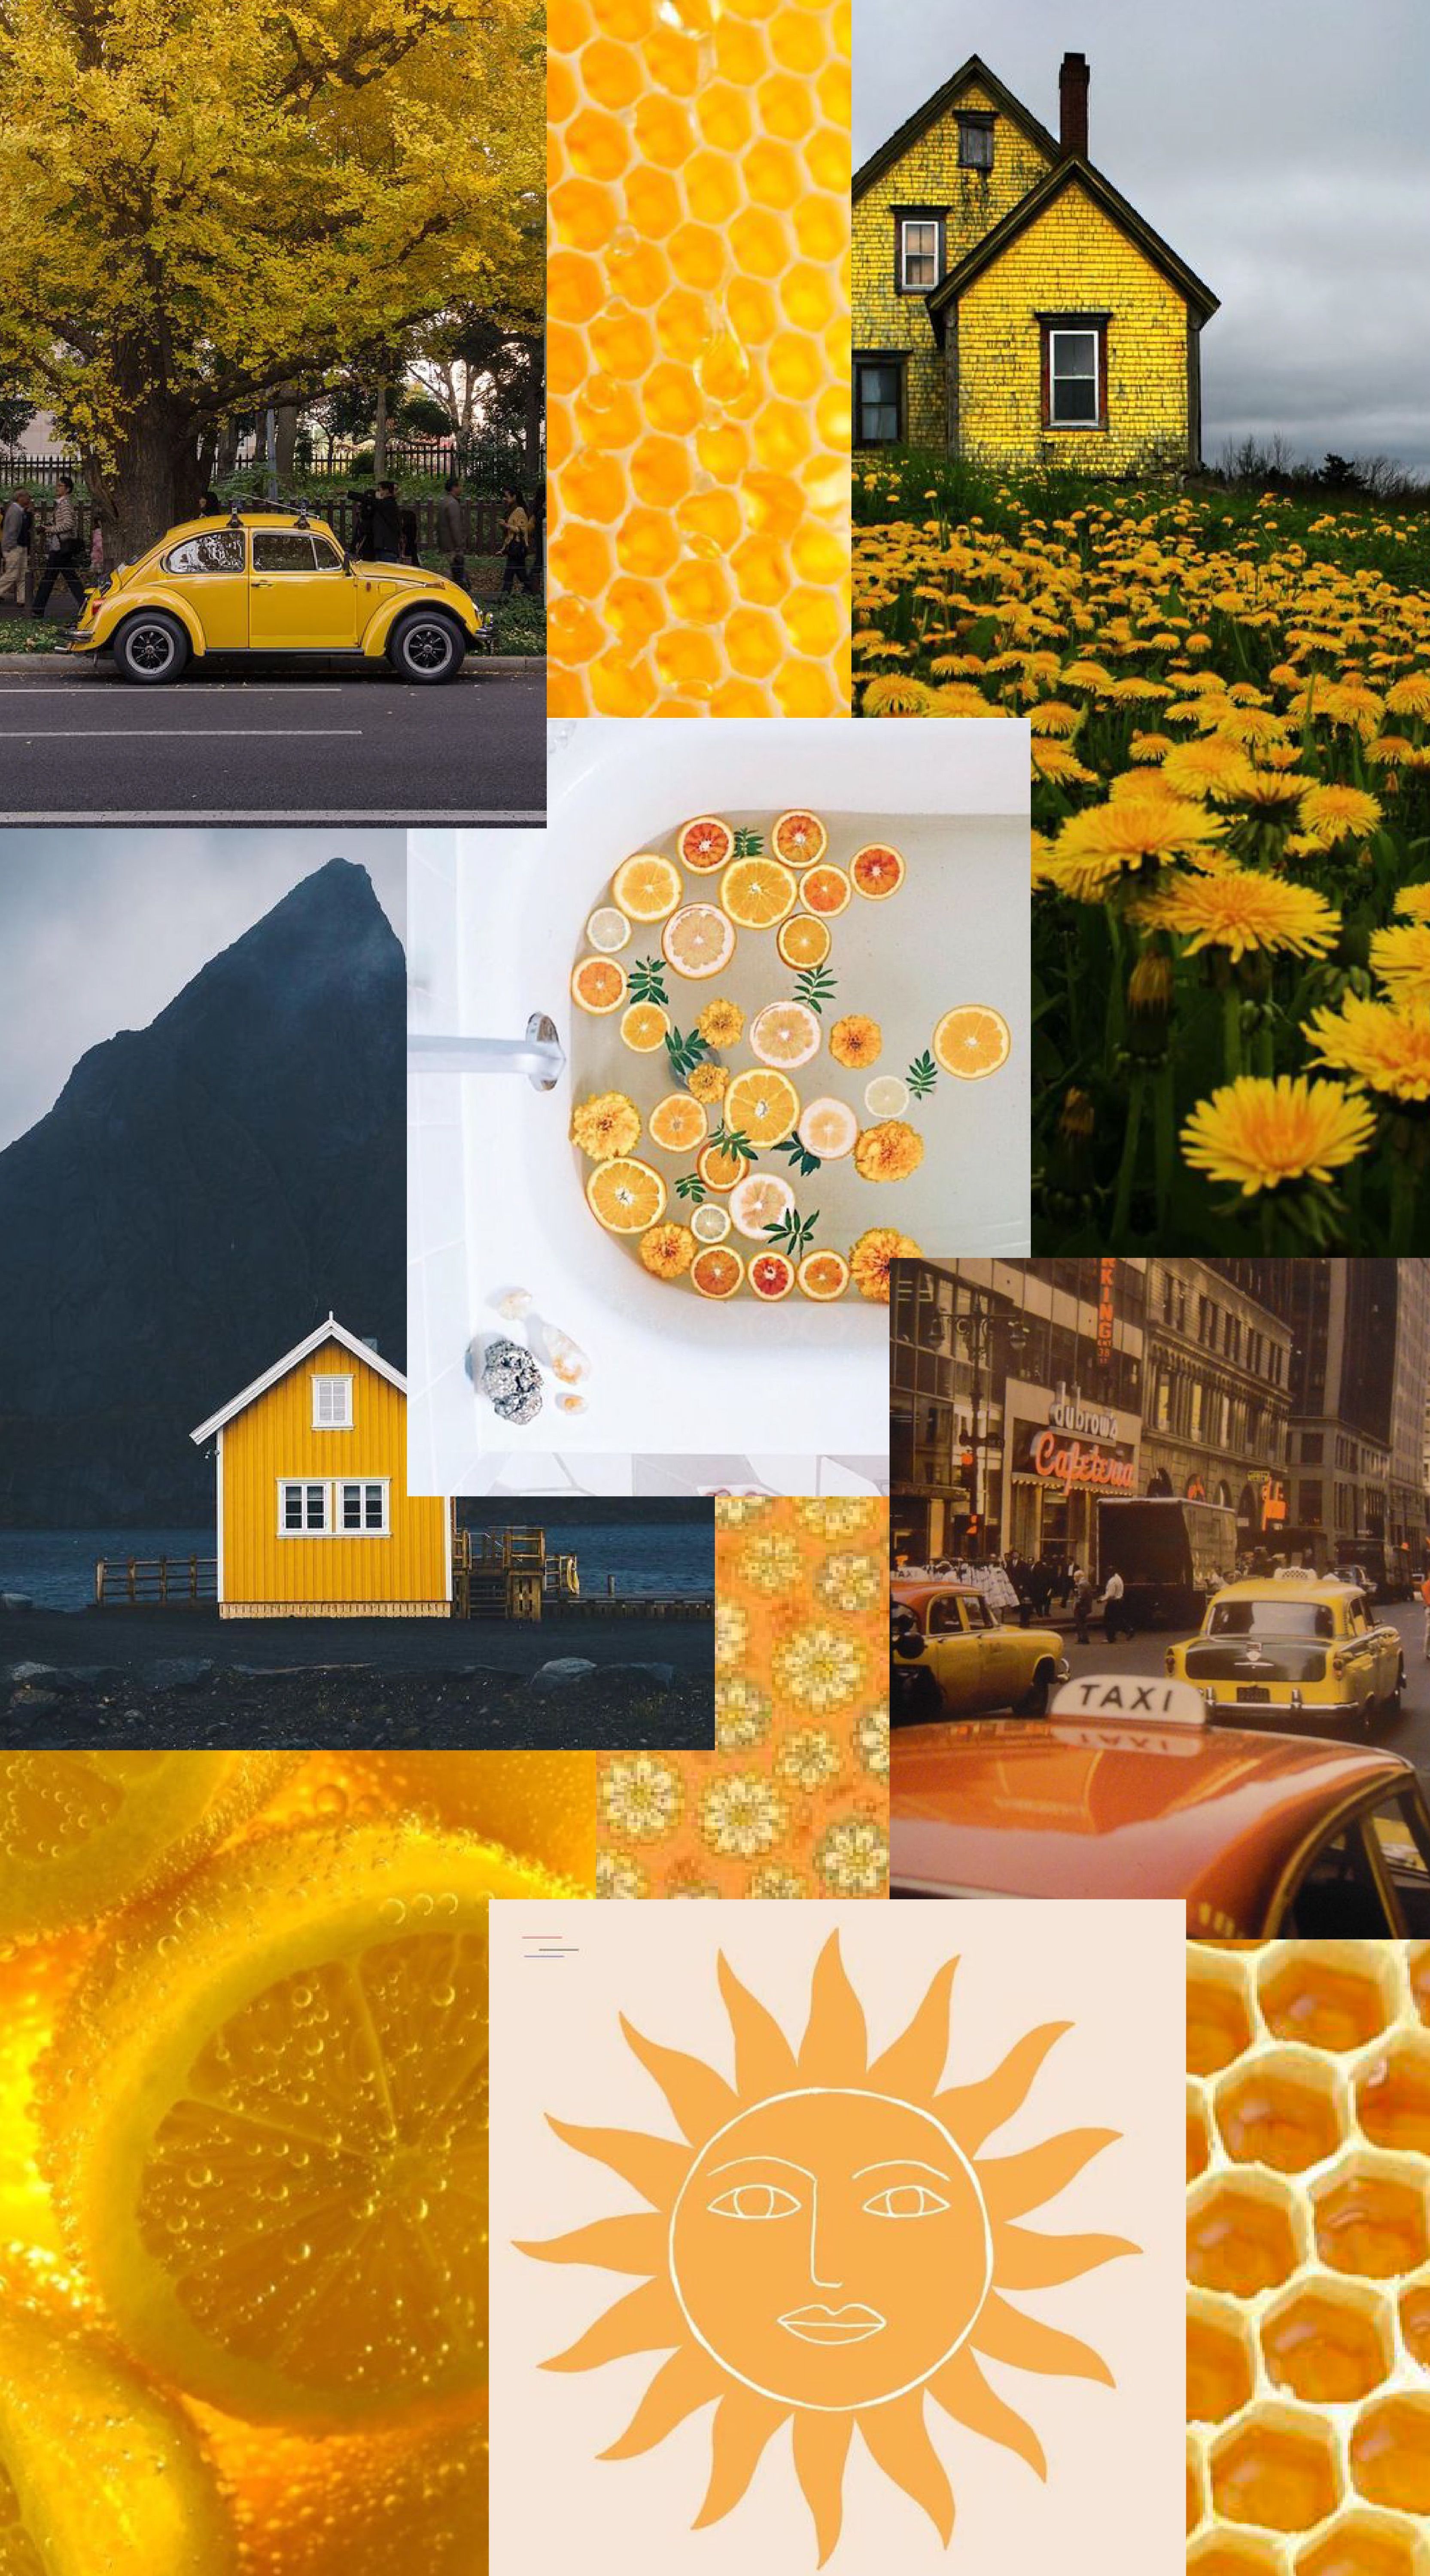 A collage of yellow images including a yellow house, a yellow car, and yellow flowers. - Summer